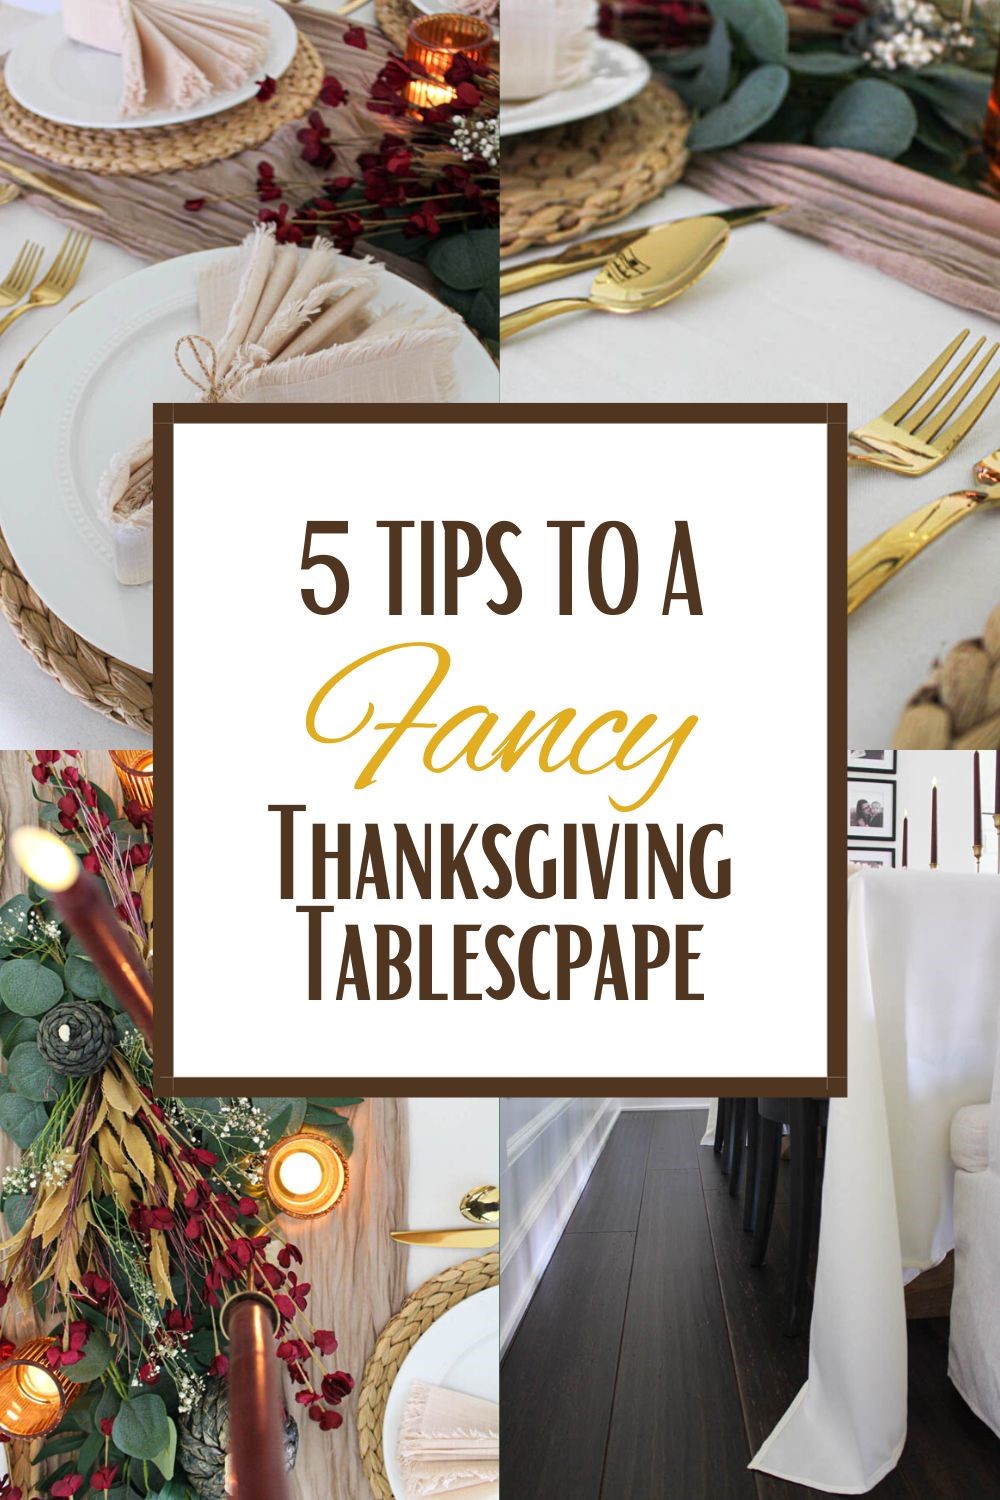 5 TIPS TO A FANCY THANKSGIVING TABLESCAPE